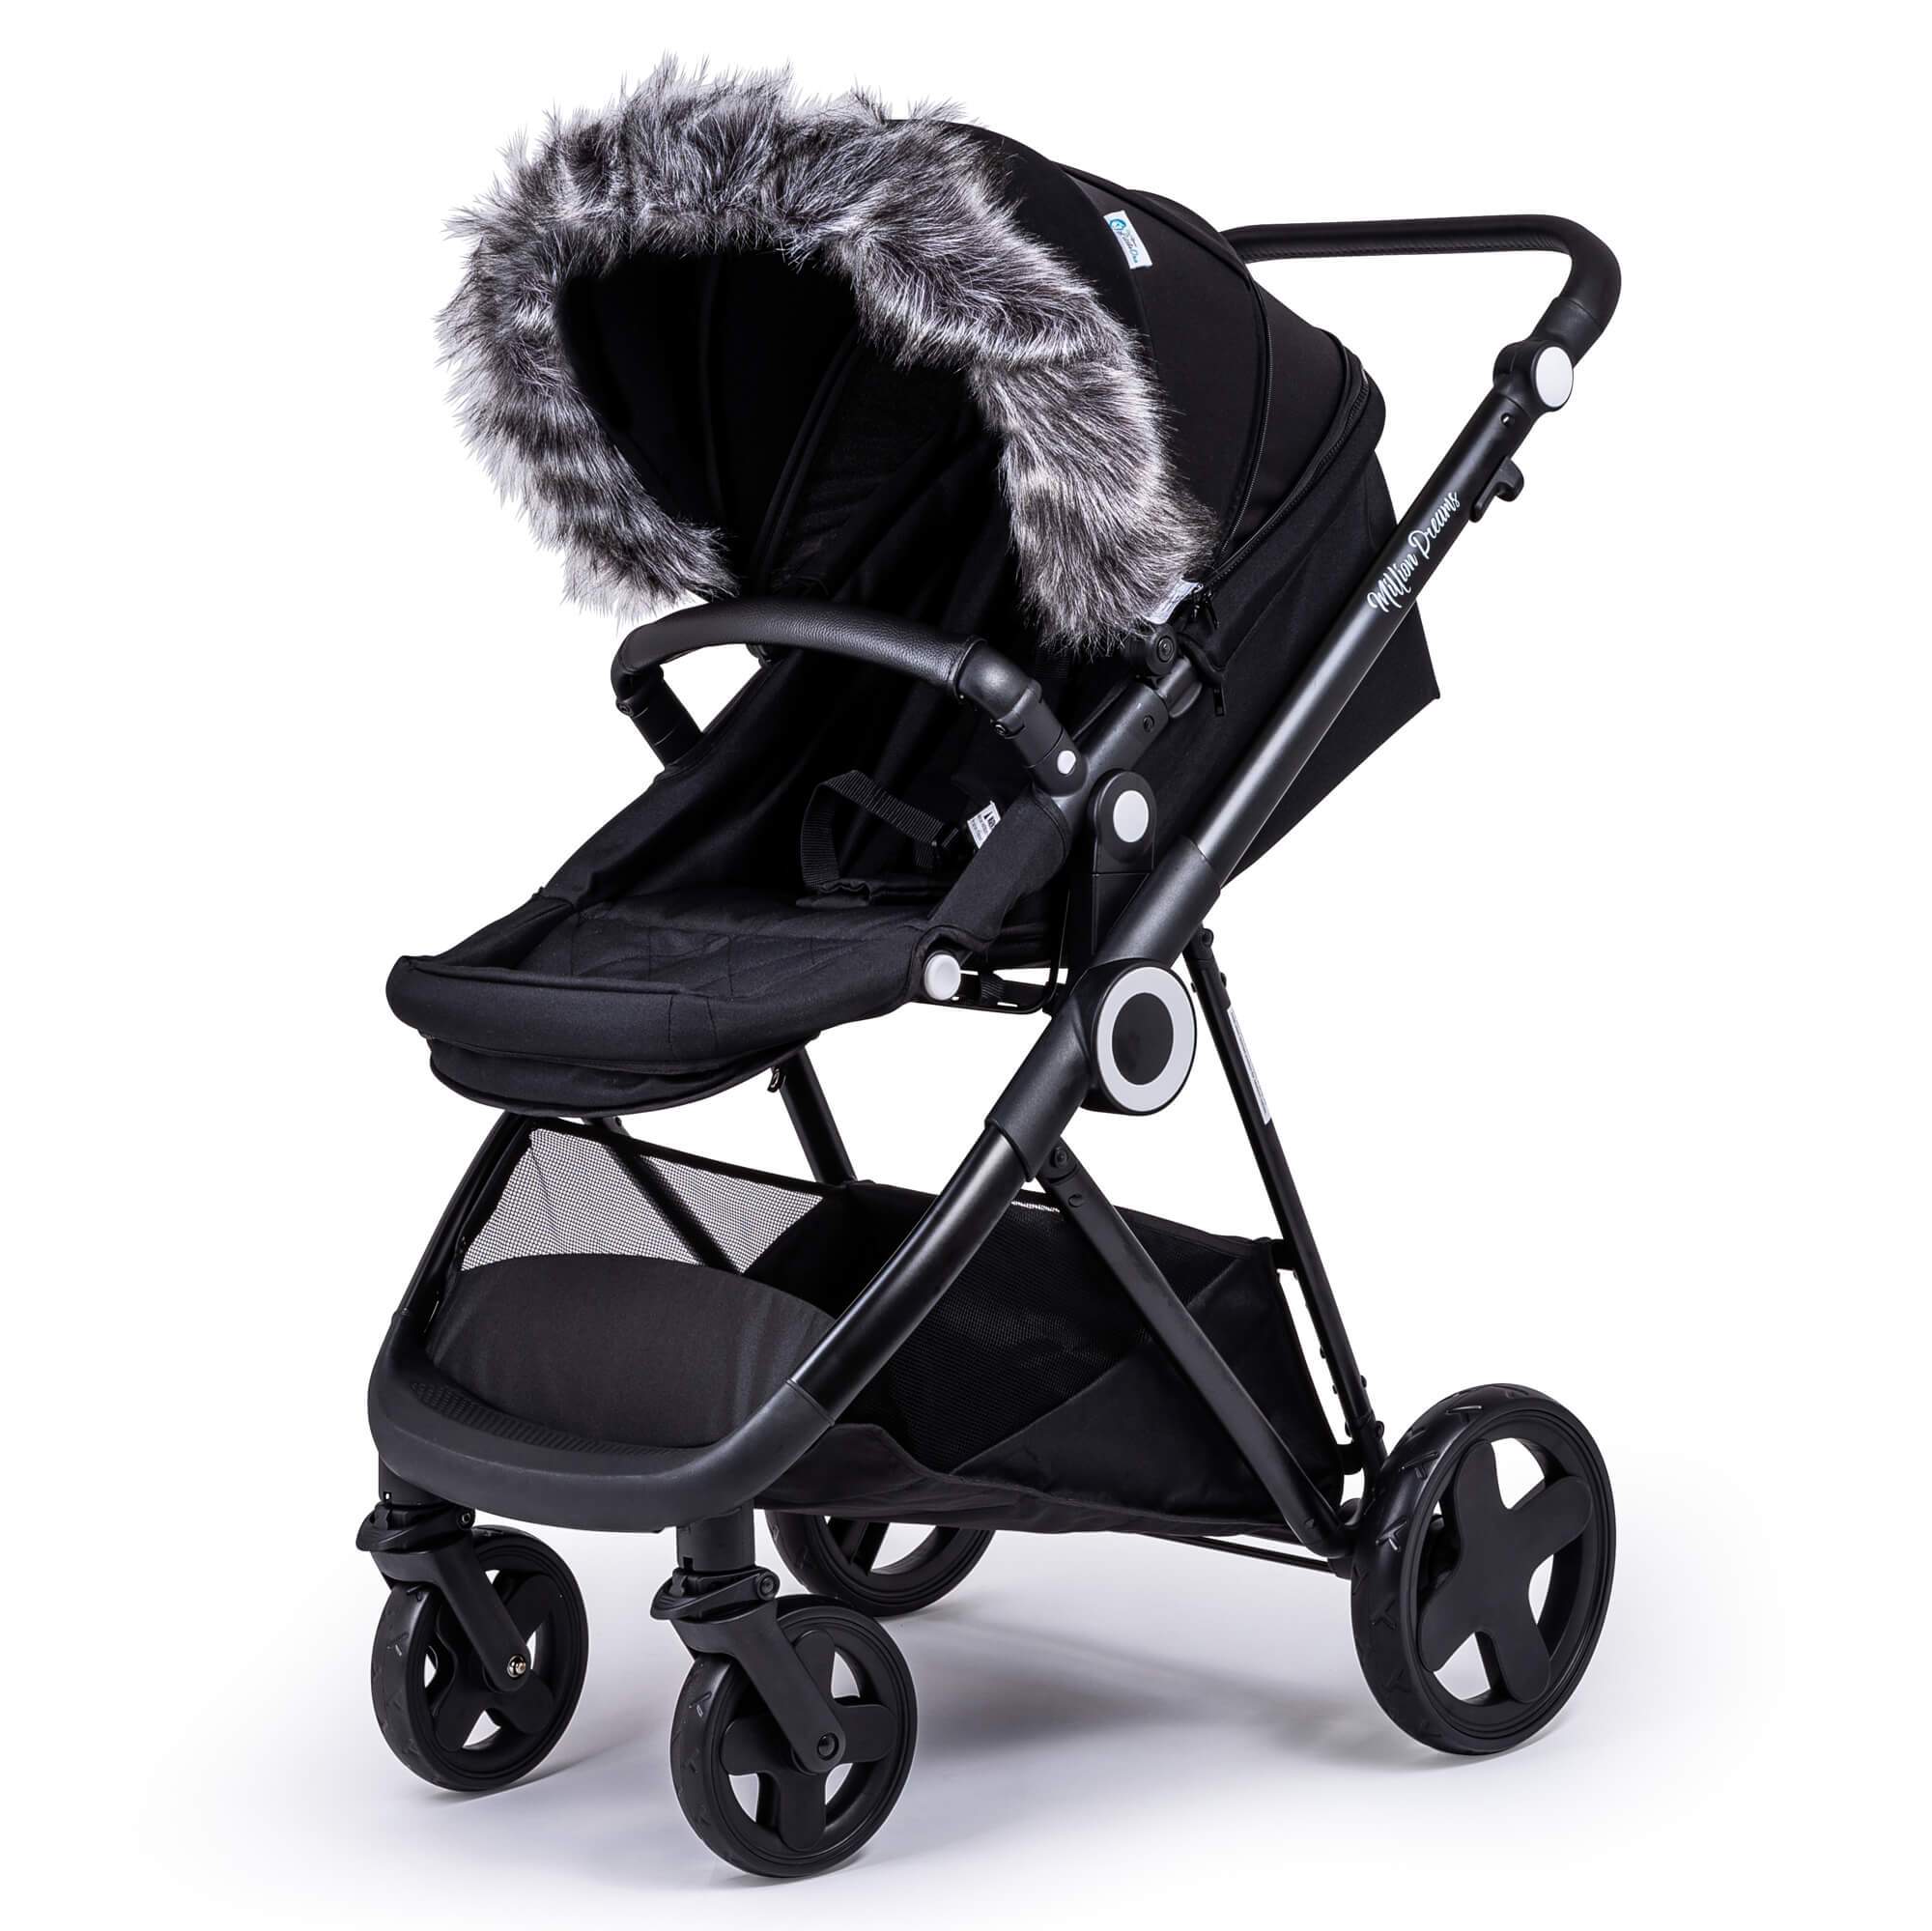 Pram Fur Hood Trim Attachment for Pushchair Compatible with Gesslein - Dark Grey / Fits All Models | For Your Little One